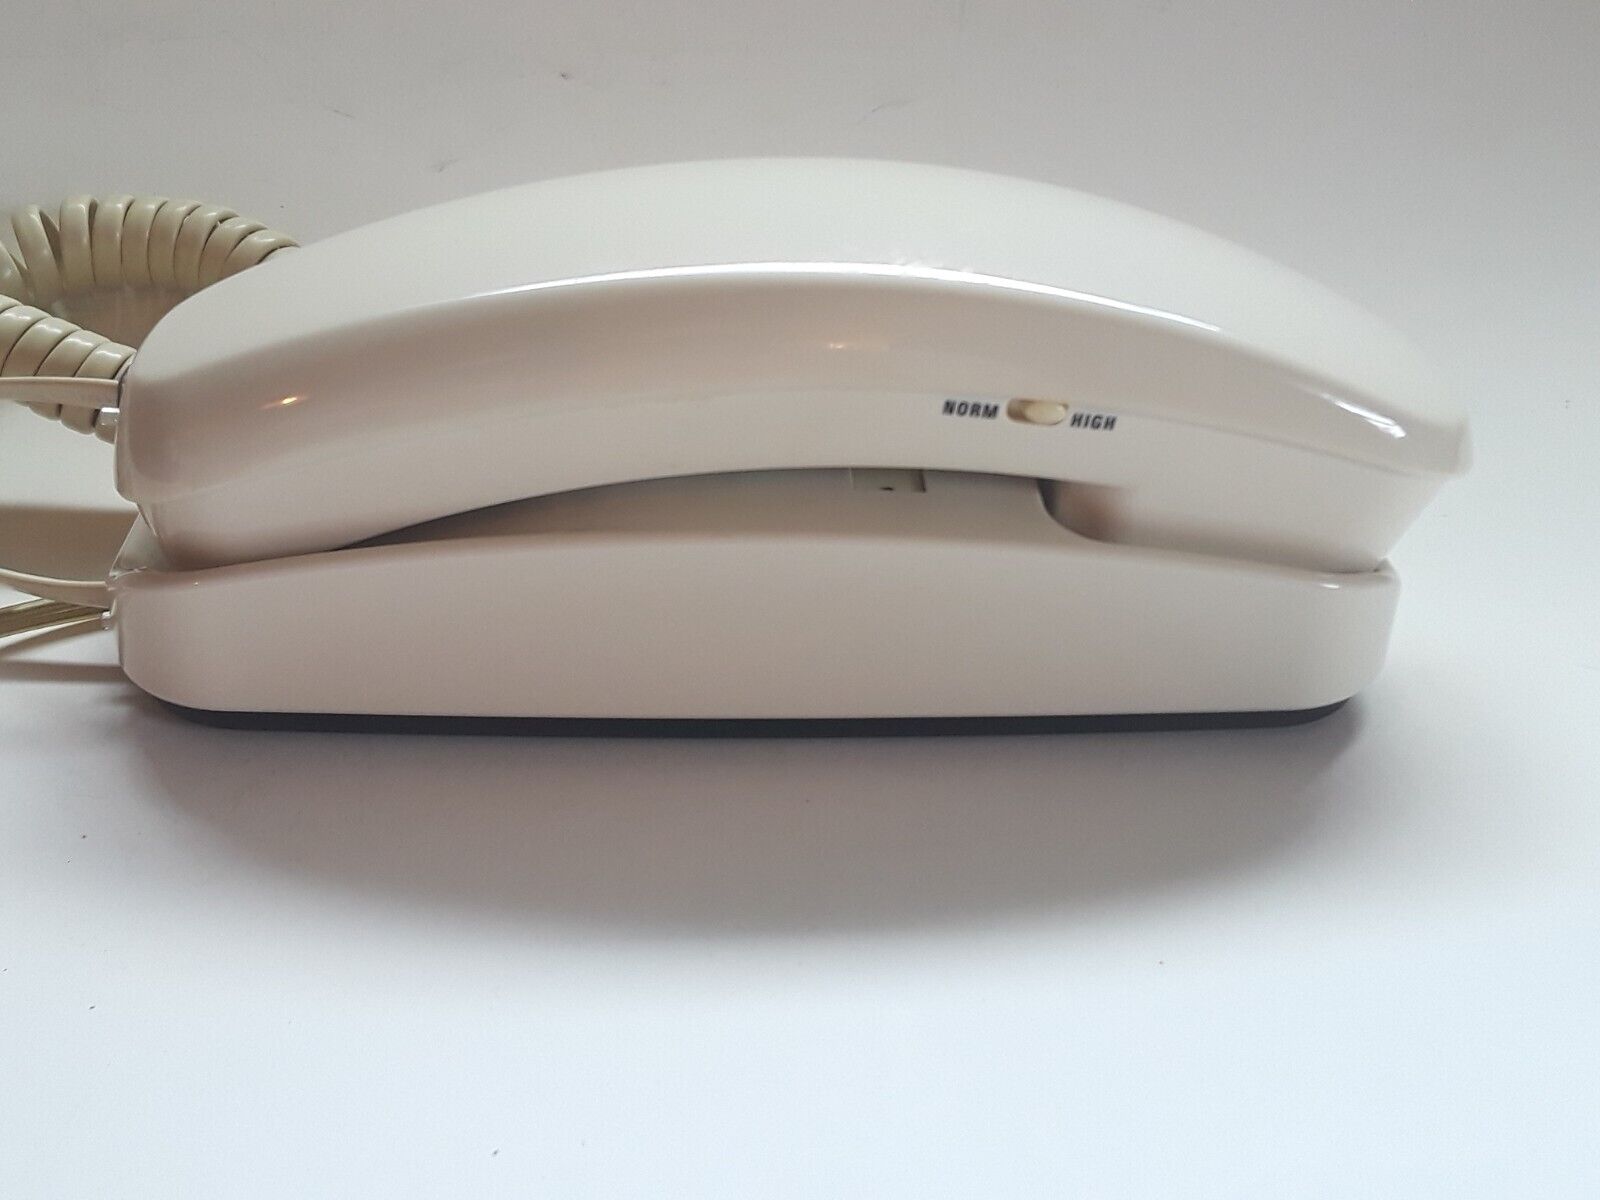 VINTAGE WHITE PUSH BUTTON DESK OR WALL PHONE TESTED WORKING  BY CONAIR